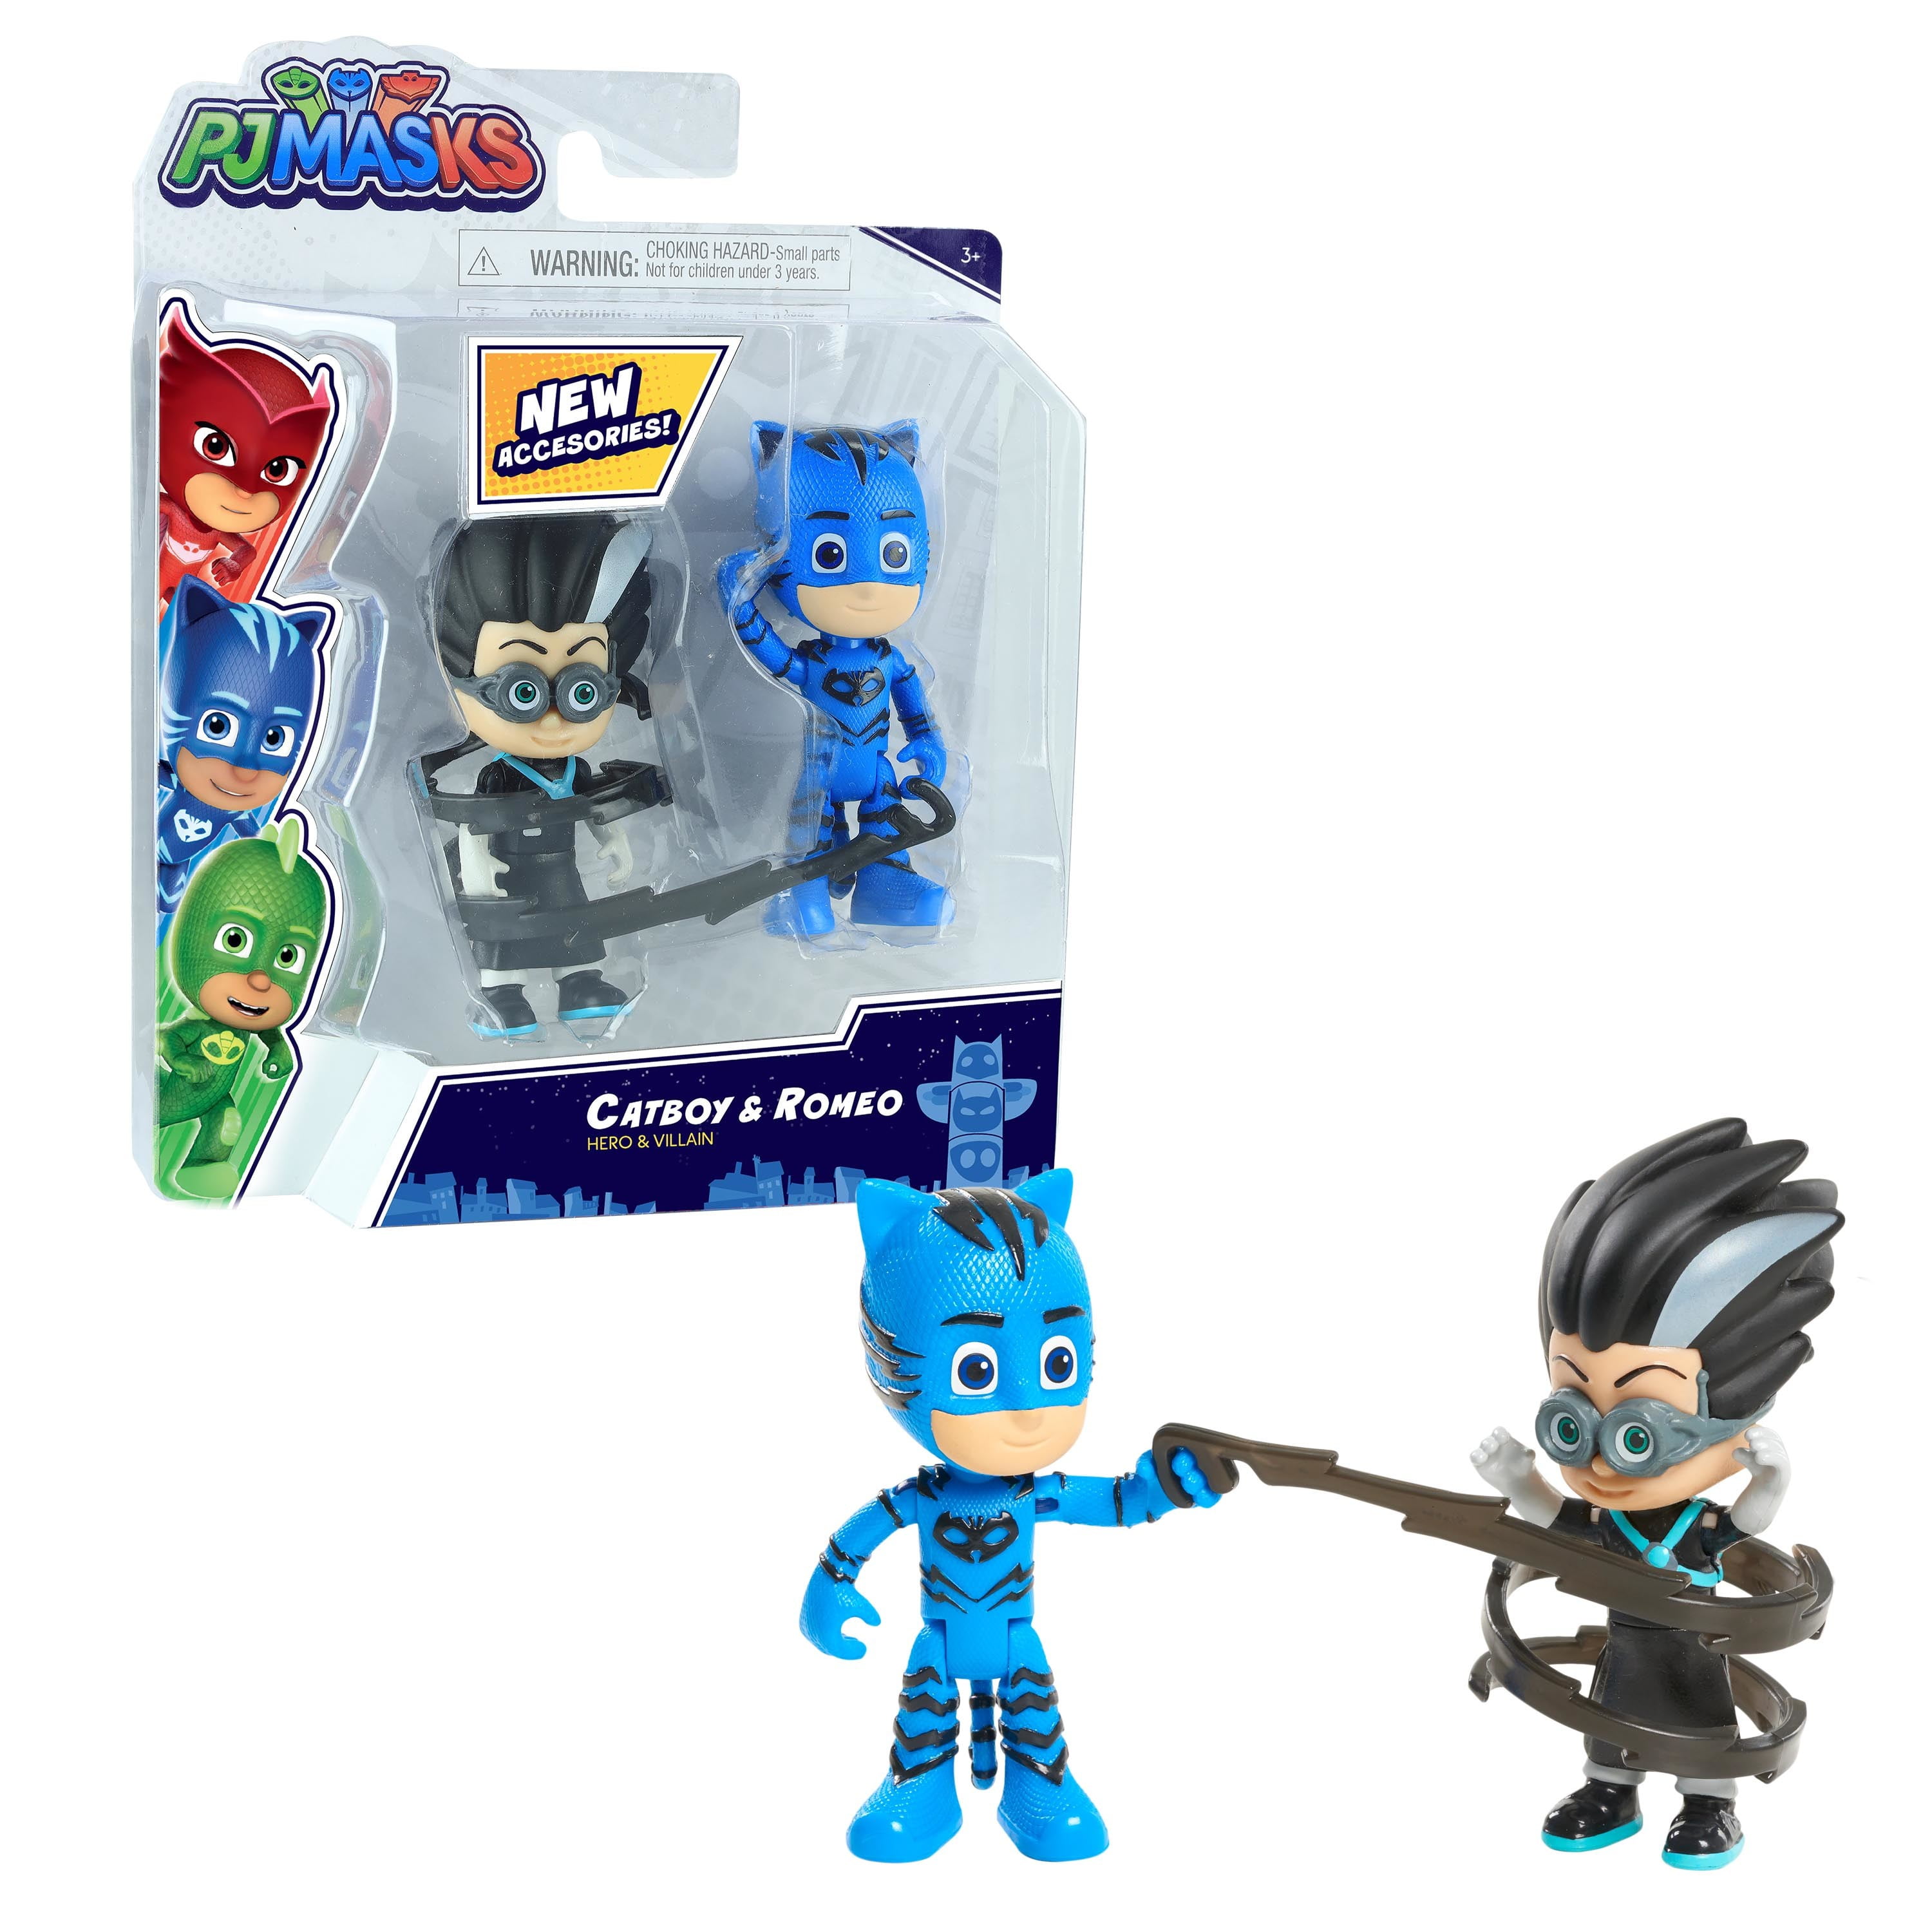 PJ Masks Power Heroes. They jumped from 3 heroes to 9?!?! Well, at